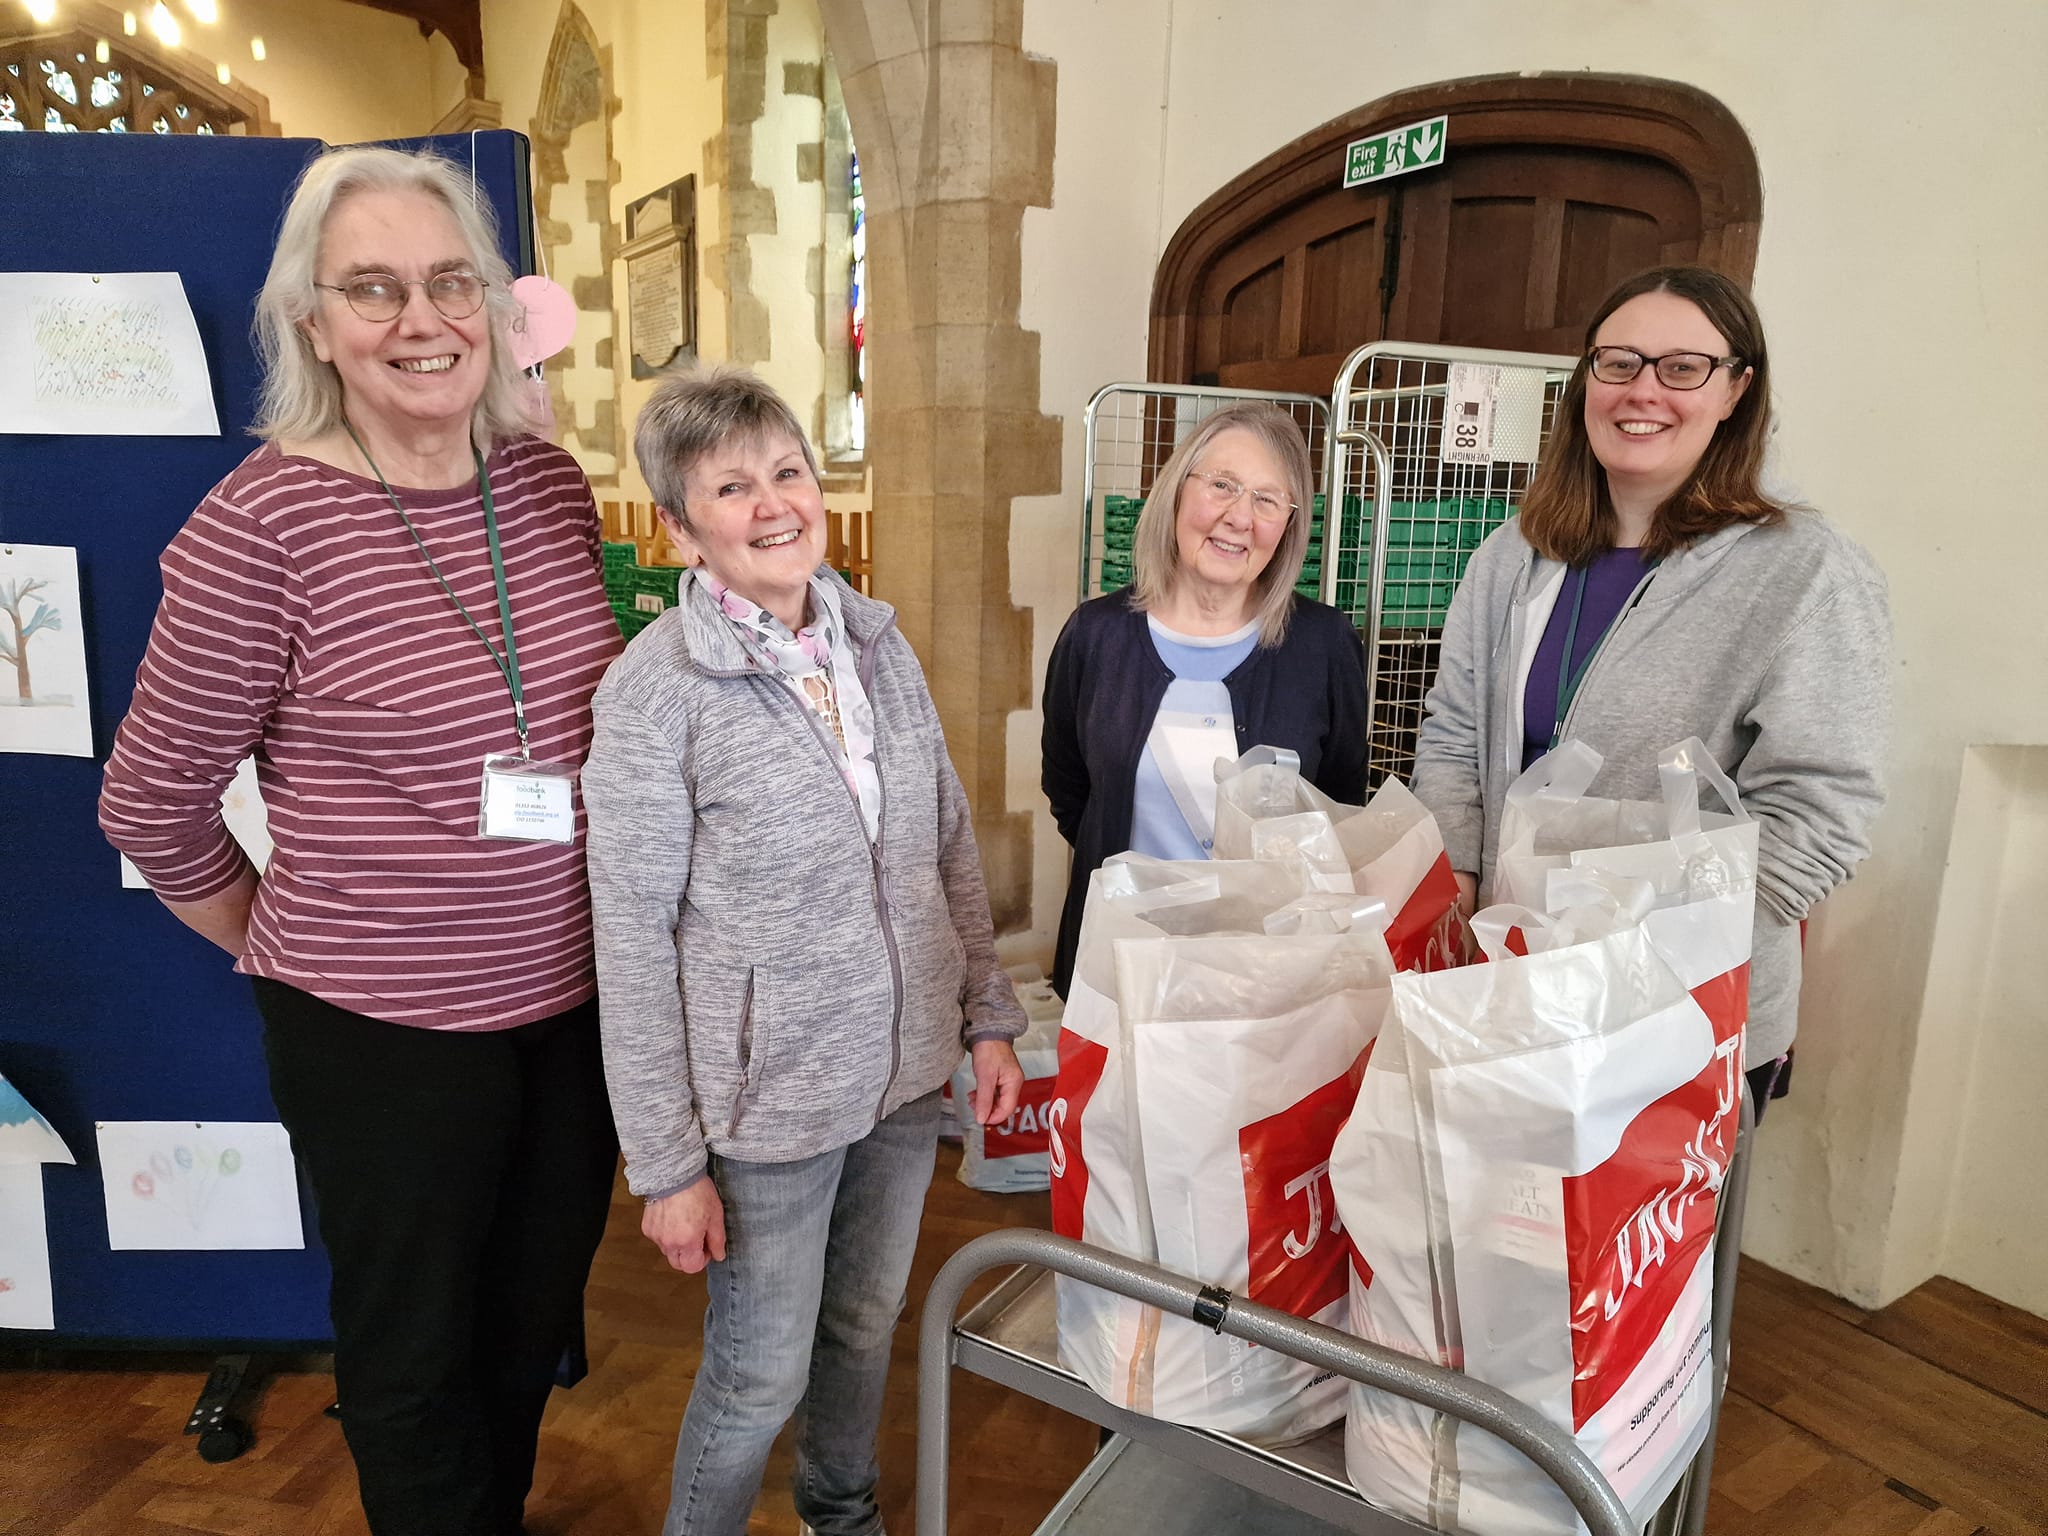 Some of the “amazing volunteers who give so much to serve the Trussell Trust food bank in Chatteris” were the words accompanying this photo posted earlier this month by the parish church.